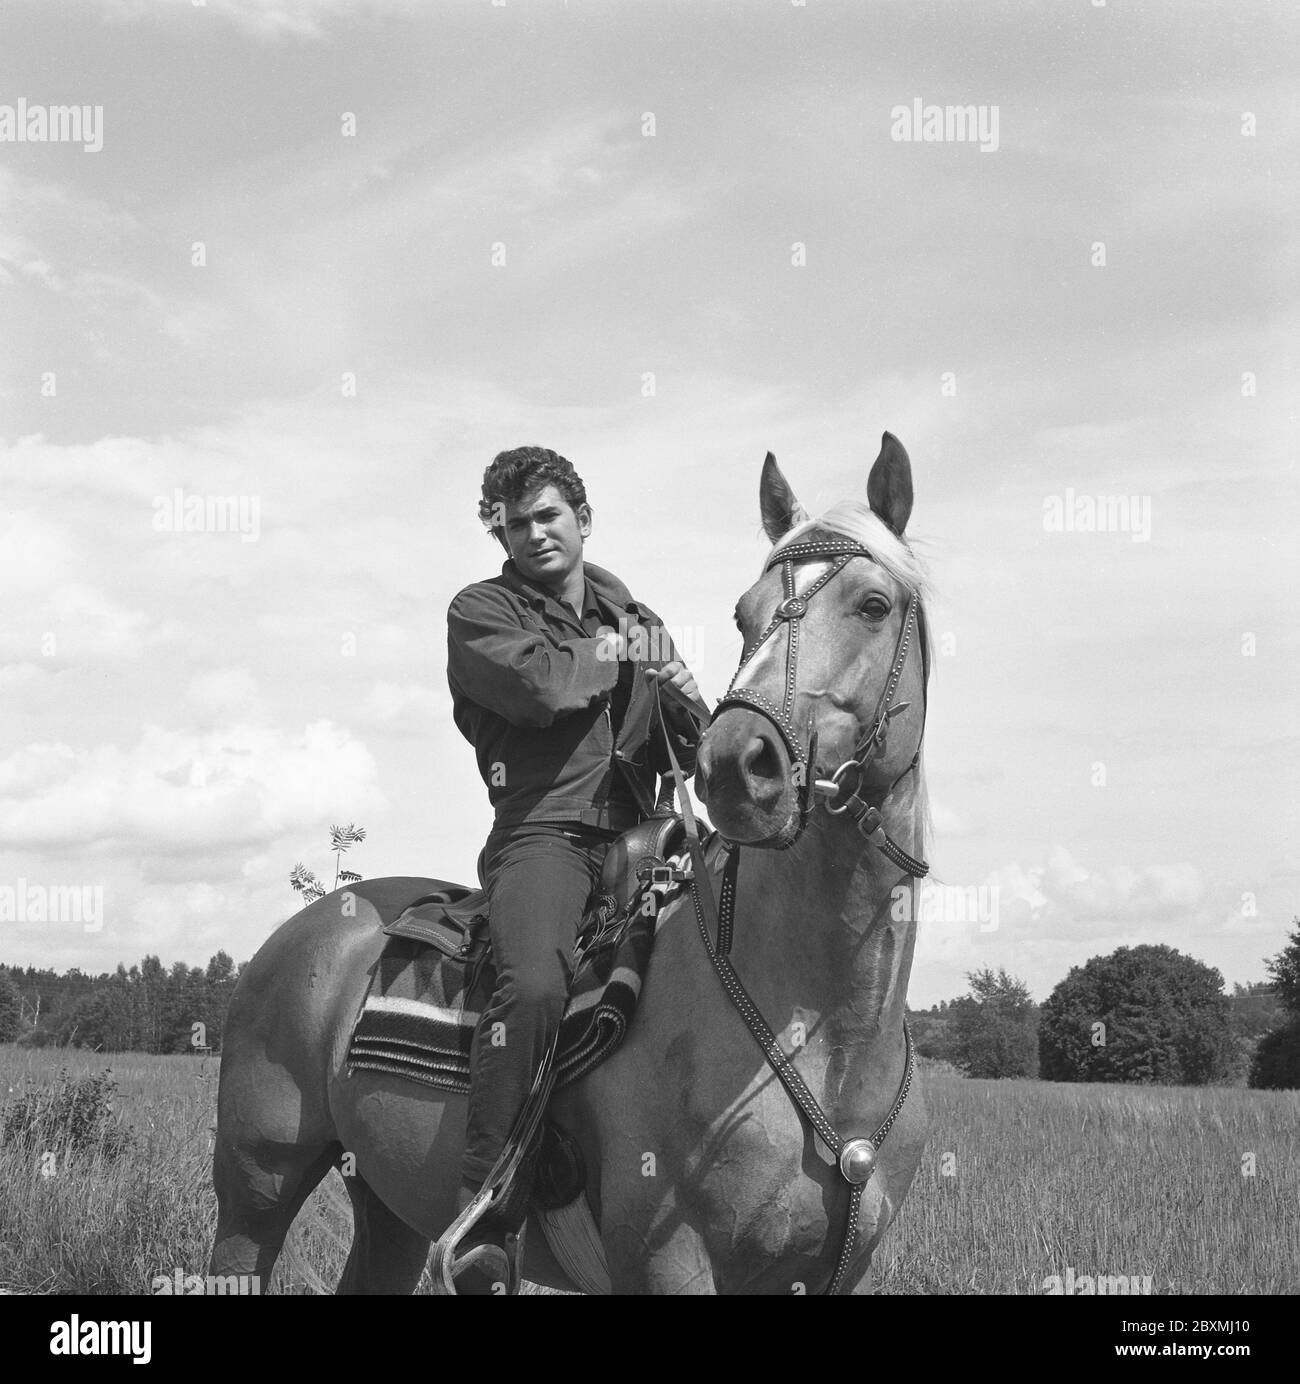 Michael Landon. American Actor. 1936-1991. Famous for his role in the american tv-serie Bonanza where he played Little Joe. Pictured when visiting Sweden 1962 and arrives at the Arlanda airport in Stockholm. A horse was ready for him to ride once out of the airplane. Stock Photo